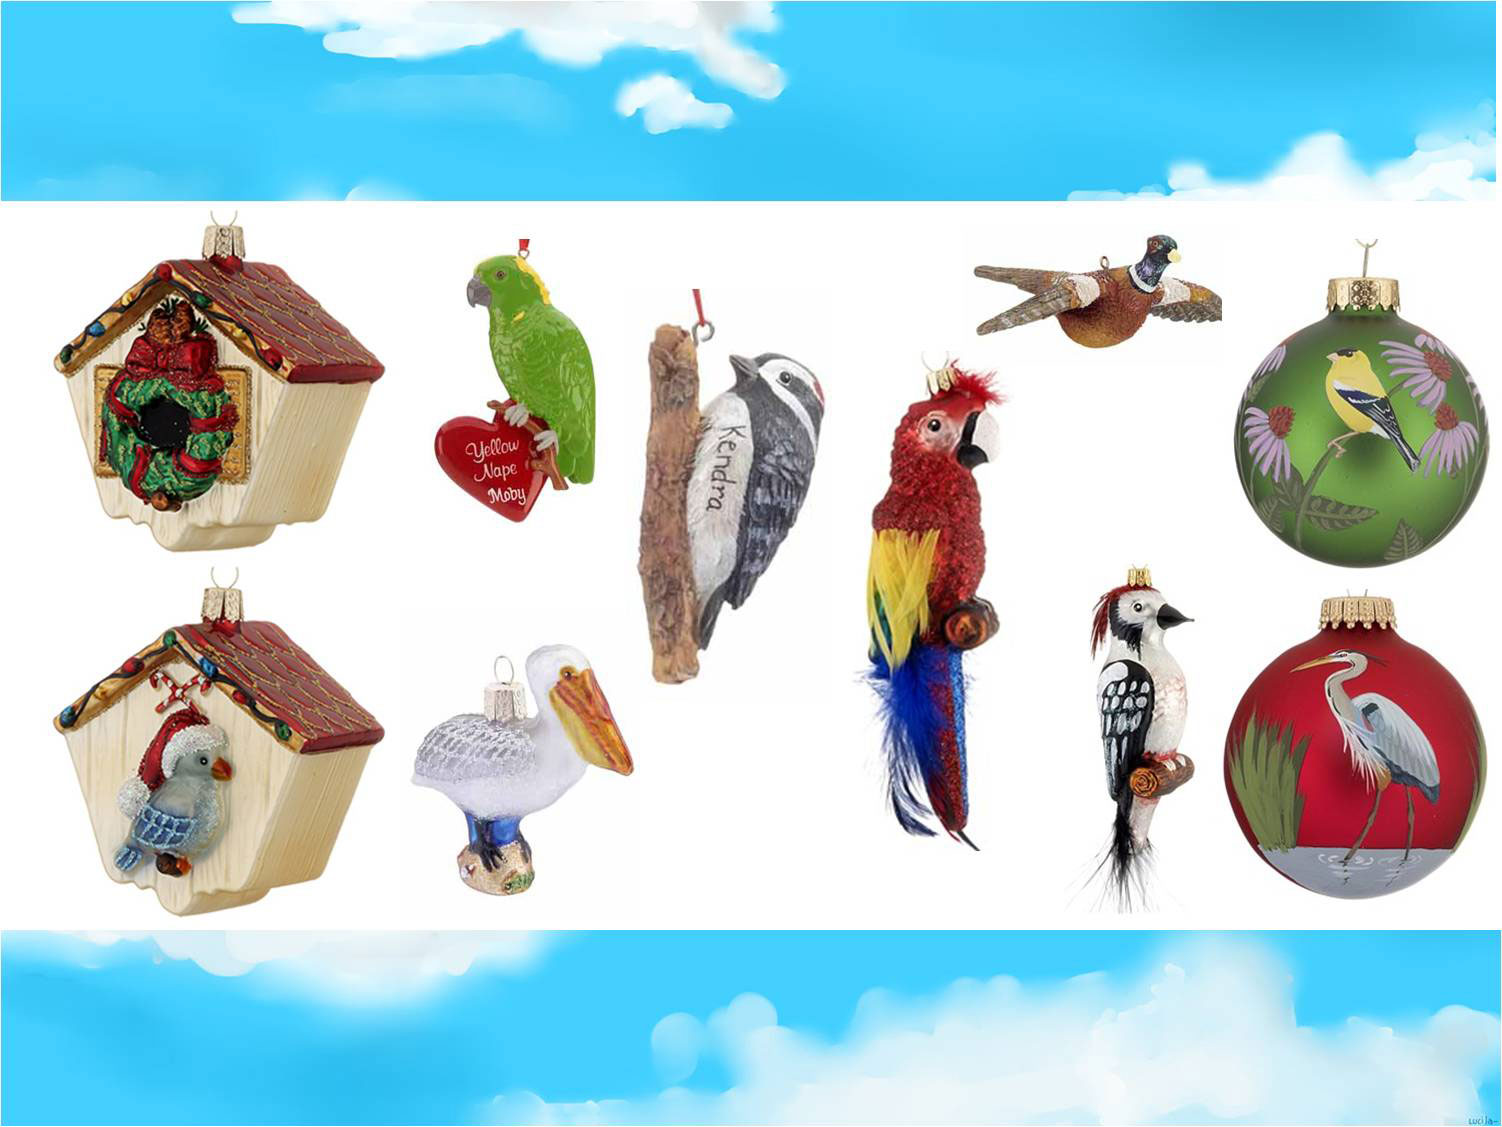 A variety of colorful bird ornaments including an amazon parrot, a yellow nape parrot, a pelican, a woodpecker, and a pheasant | OrnamentShop.com 